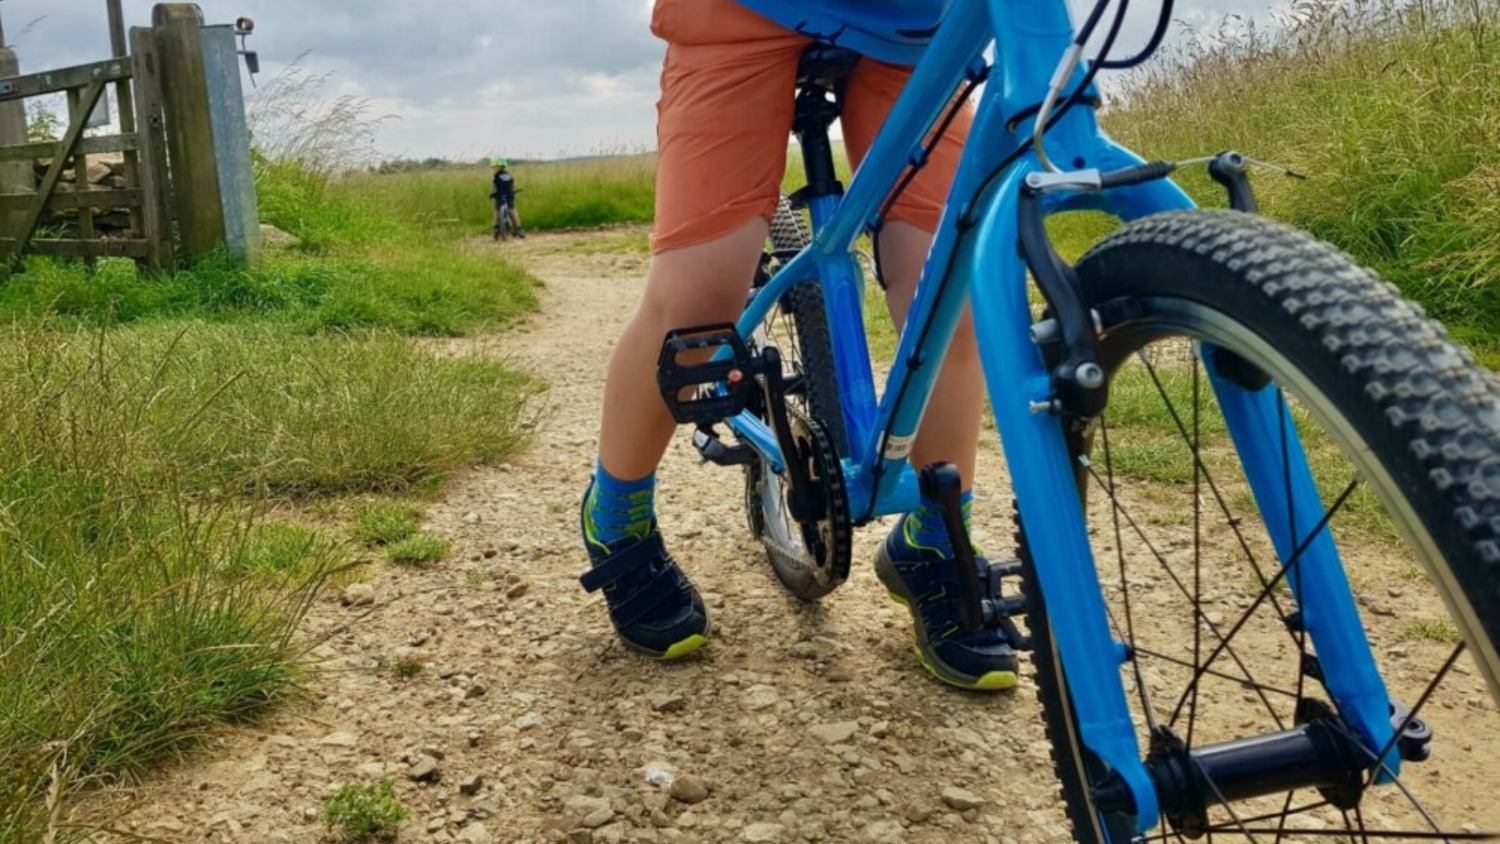 A close up view of a child's legs mounted over a blue bike